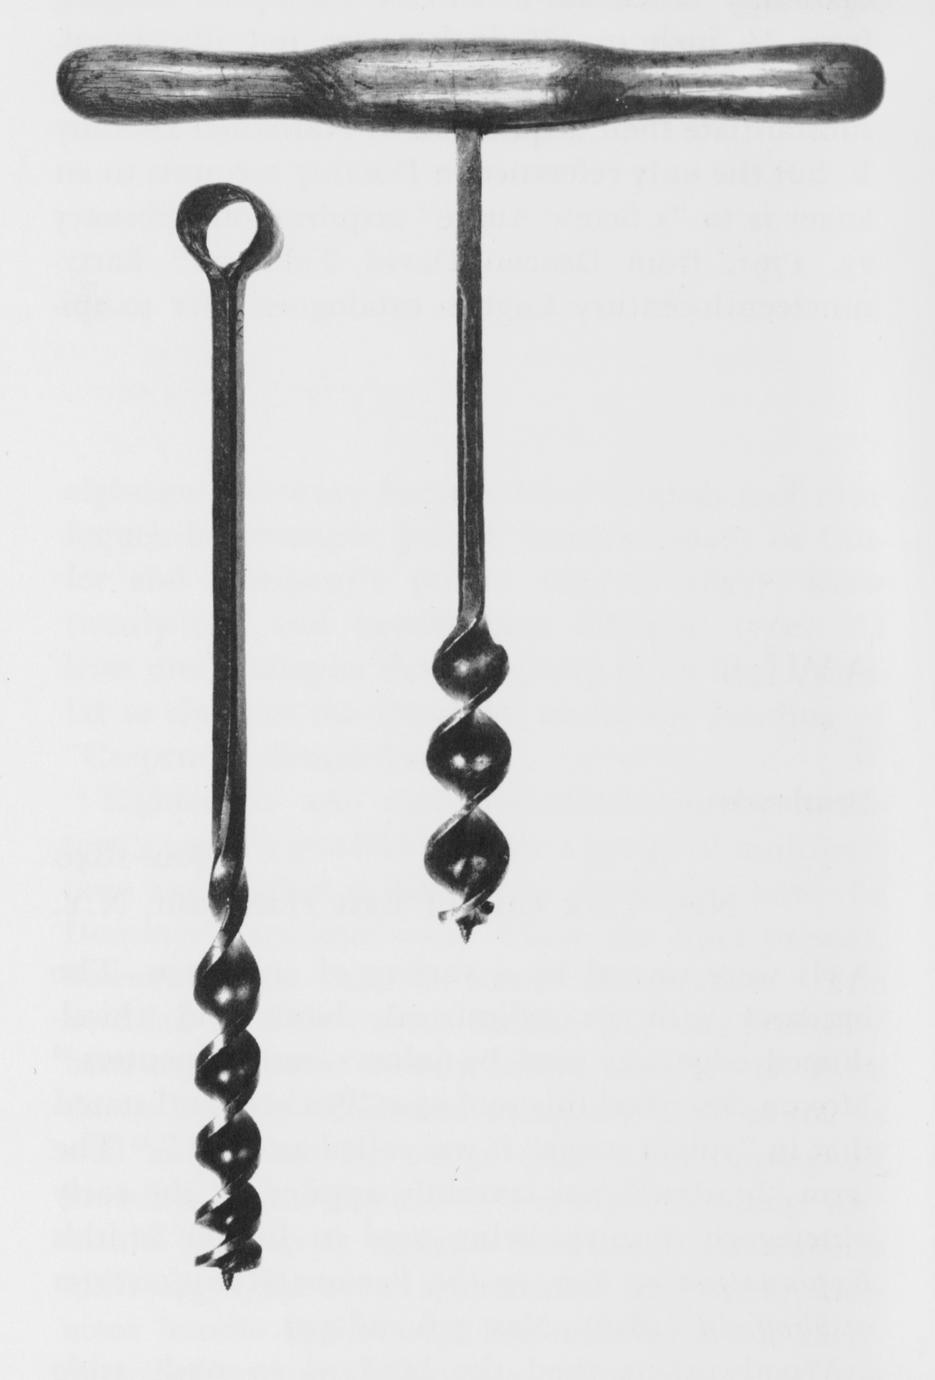 Black and white image of two augers, one with a handle and one without.